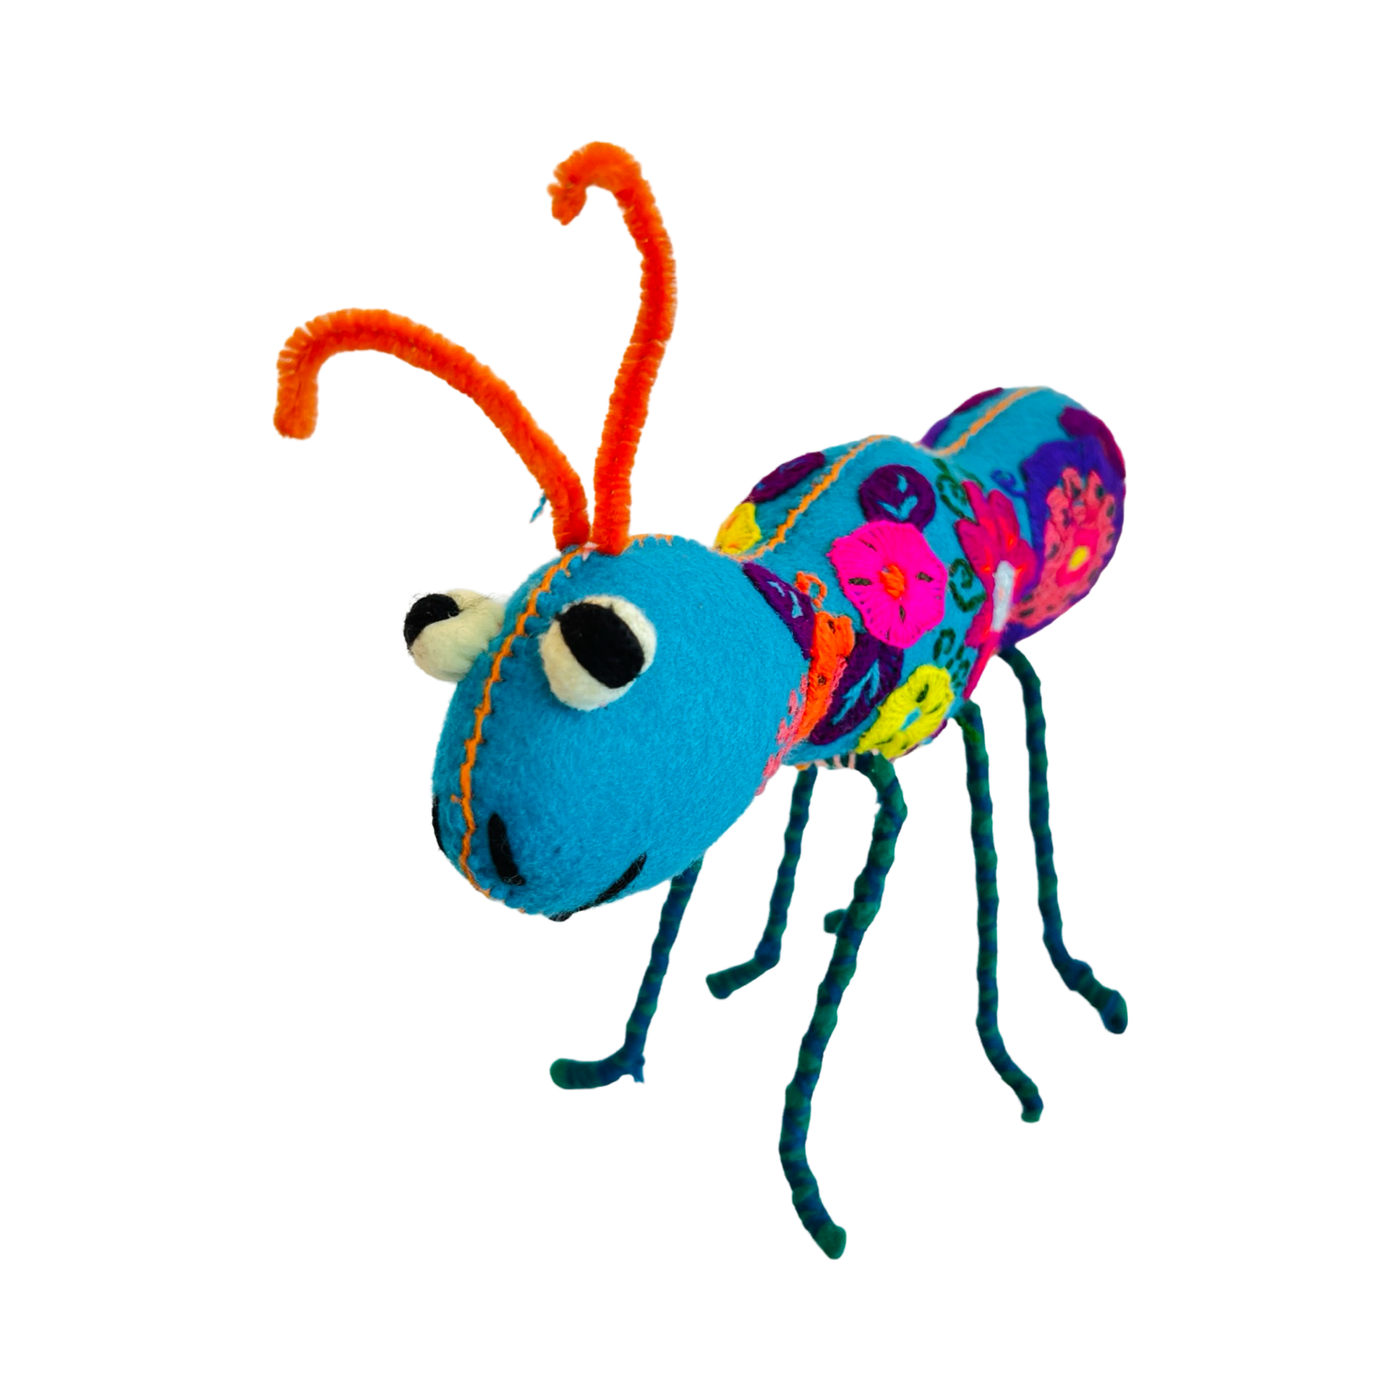 front view of a Felt ant doll with embroidered floral design